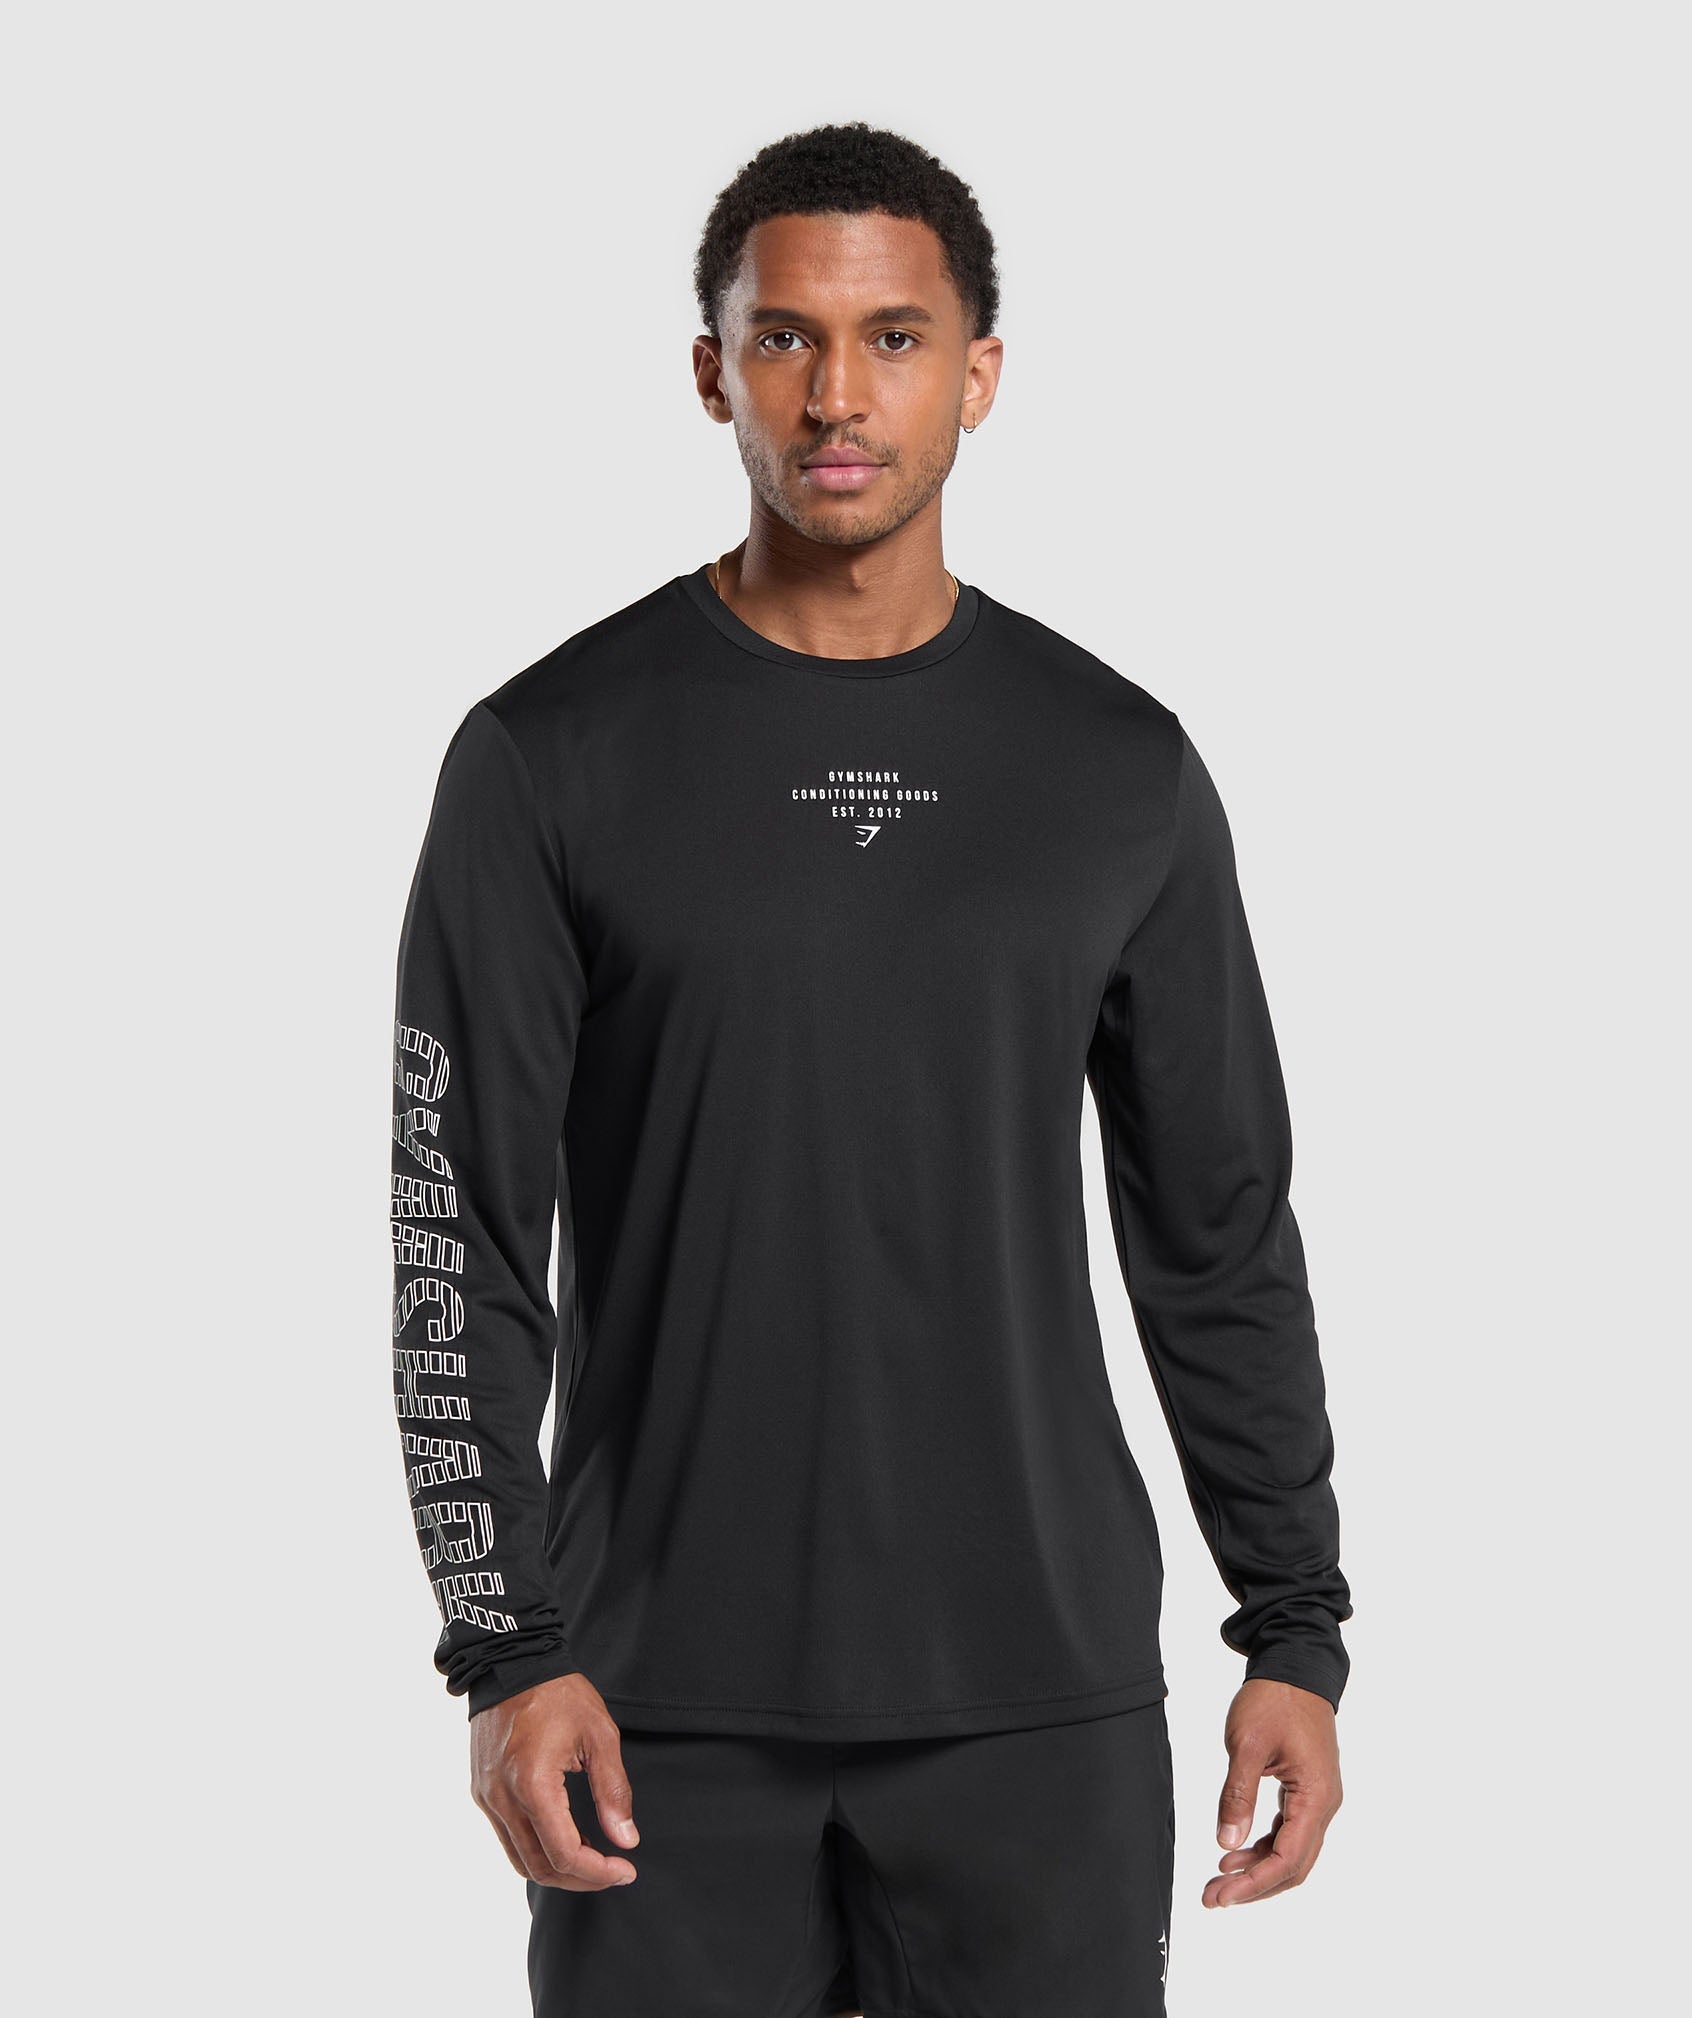 Conditioning Goods Long Sleeve T-Shirt